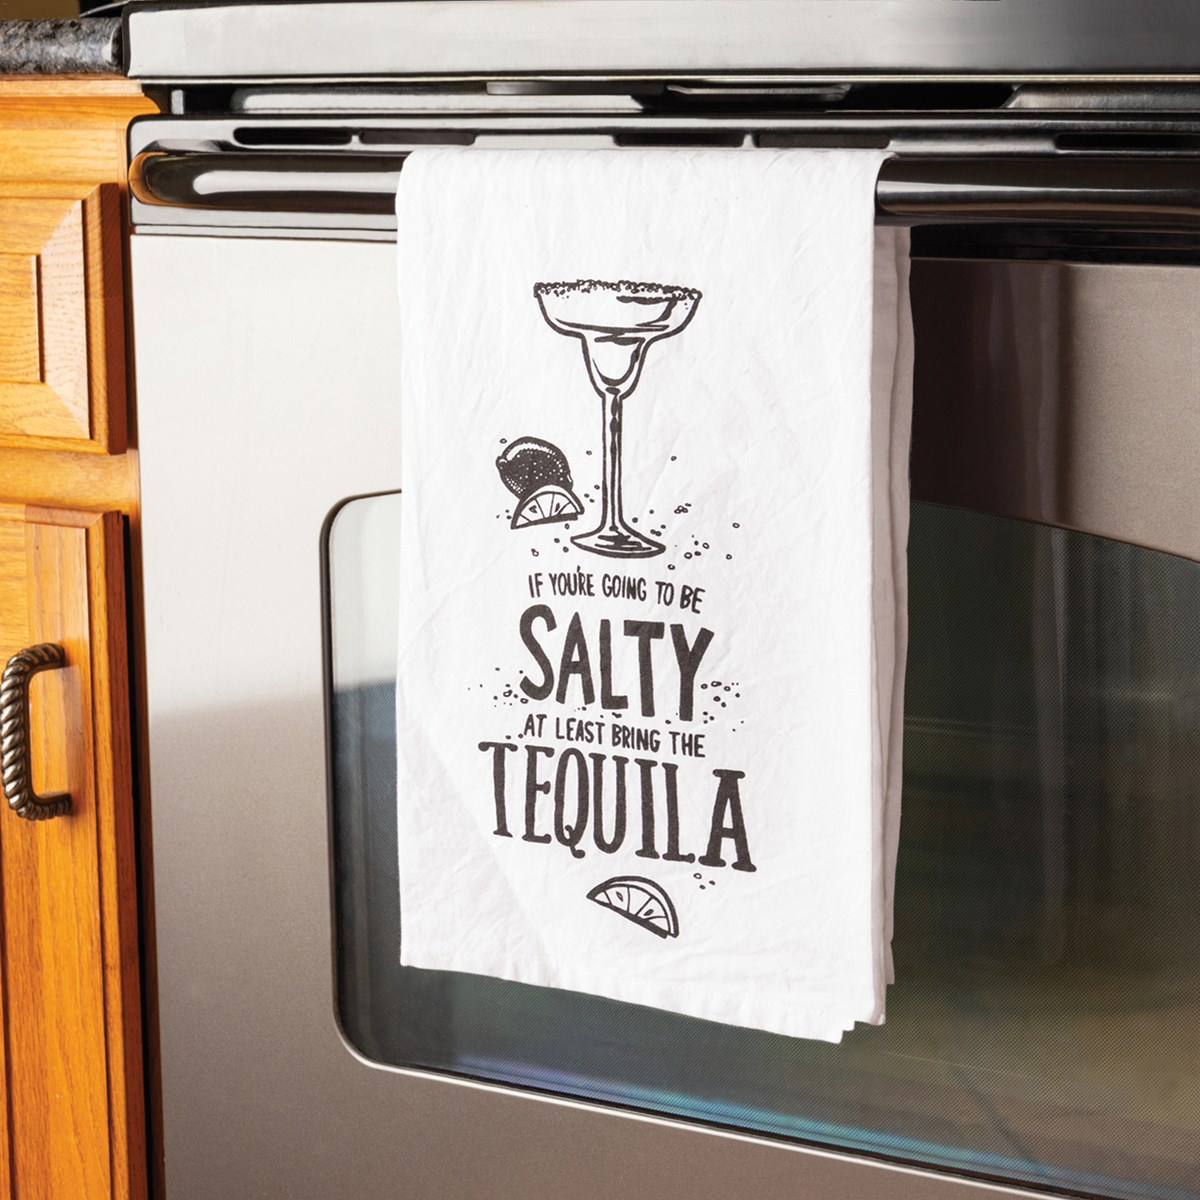 At Least Bring The Tequila Kitchen Towel - Cotton